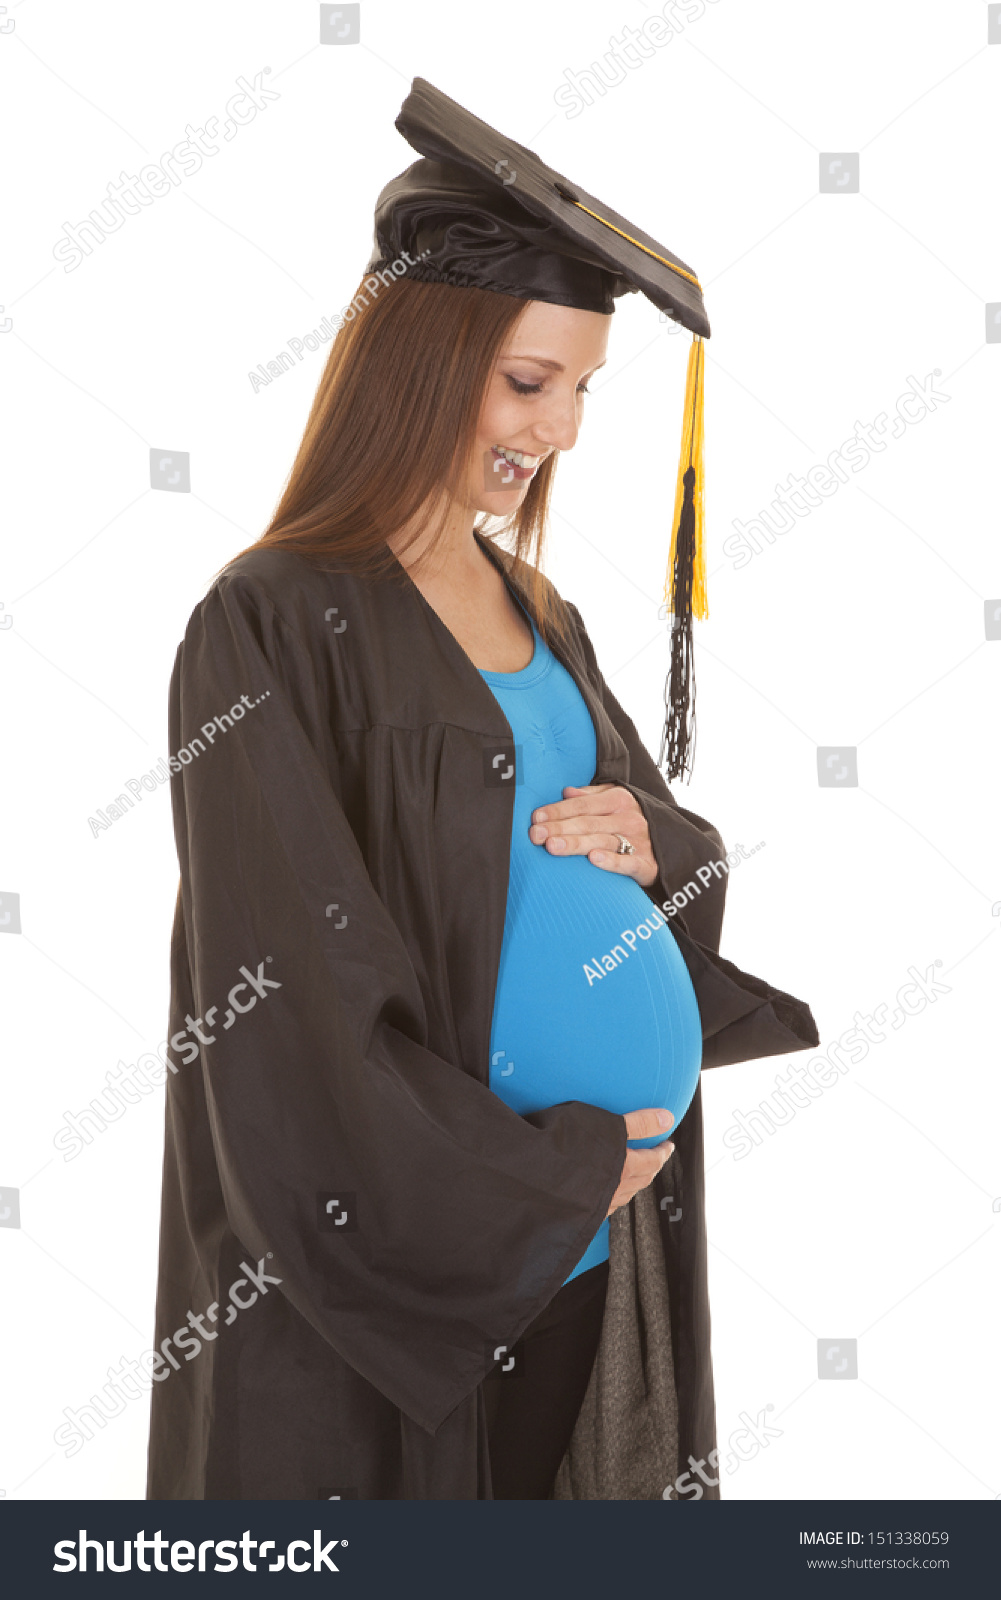 stock-photo-a-pregnant-woman-in-a-graduation-gown-holding-her-belly-151338059.jpg